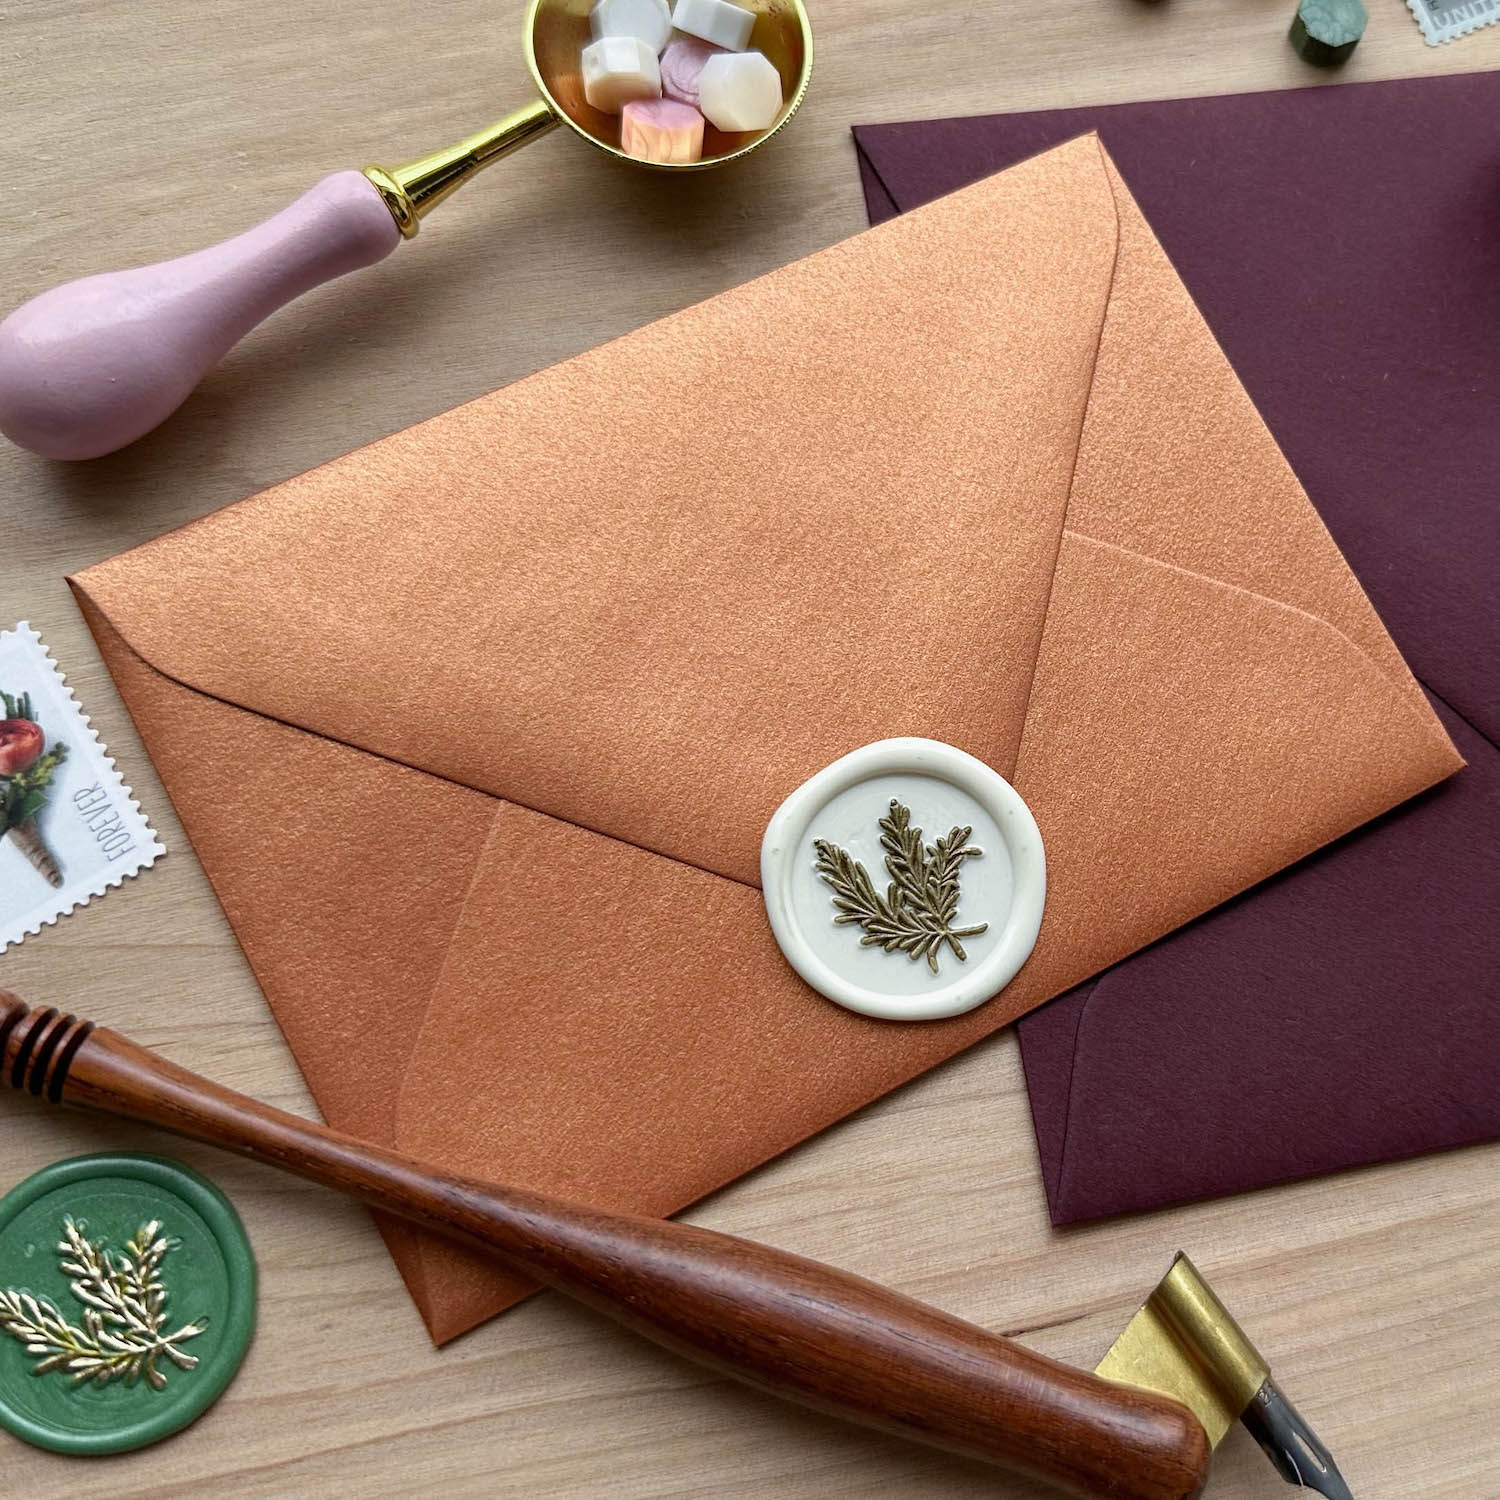 Copper Stardream Metallic Envelope with wax seal